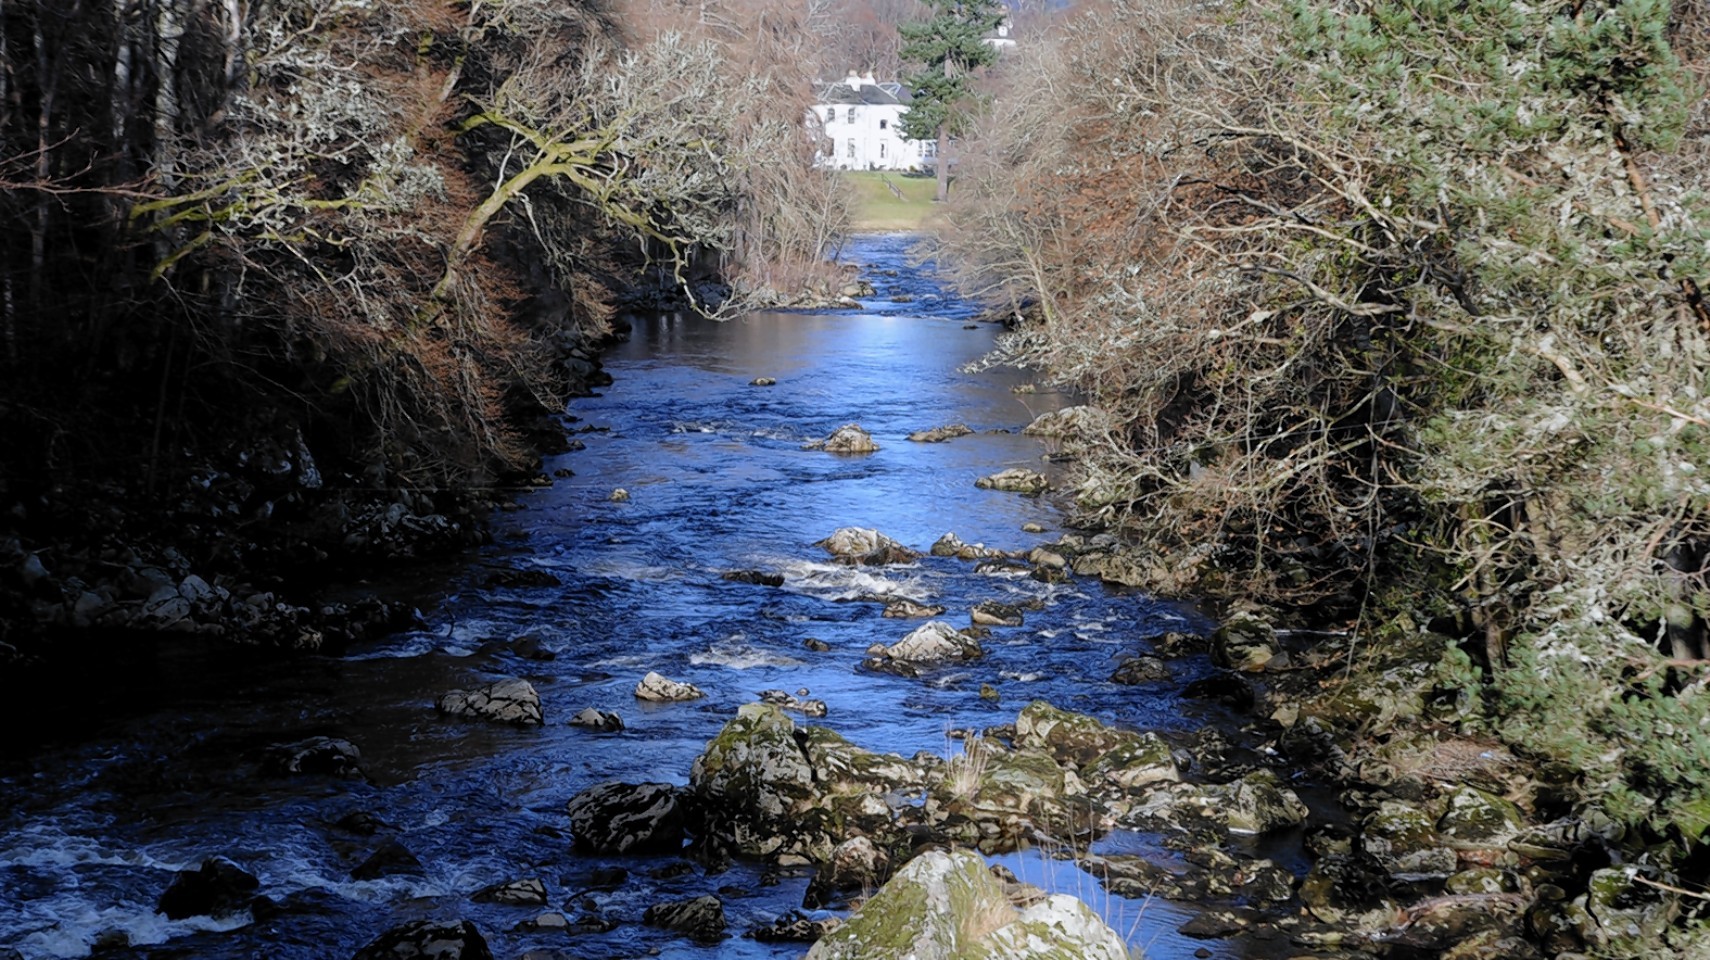 Banchory named one of best places in Scottish countryside